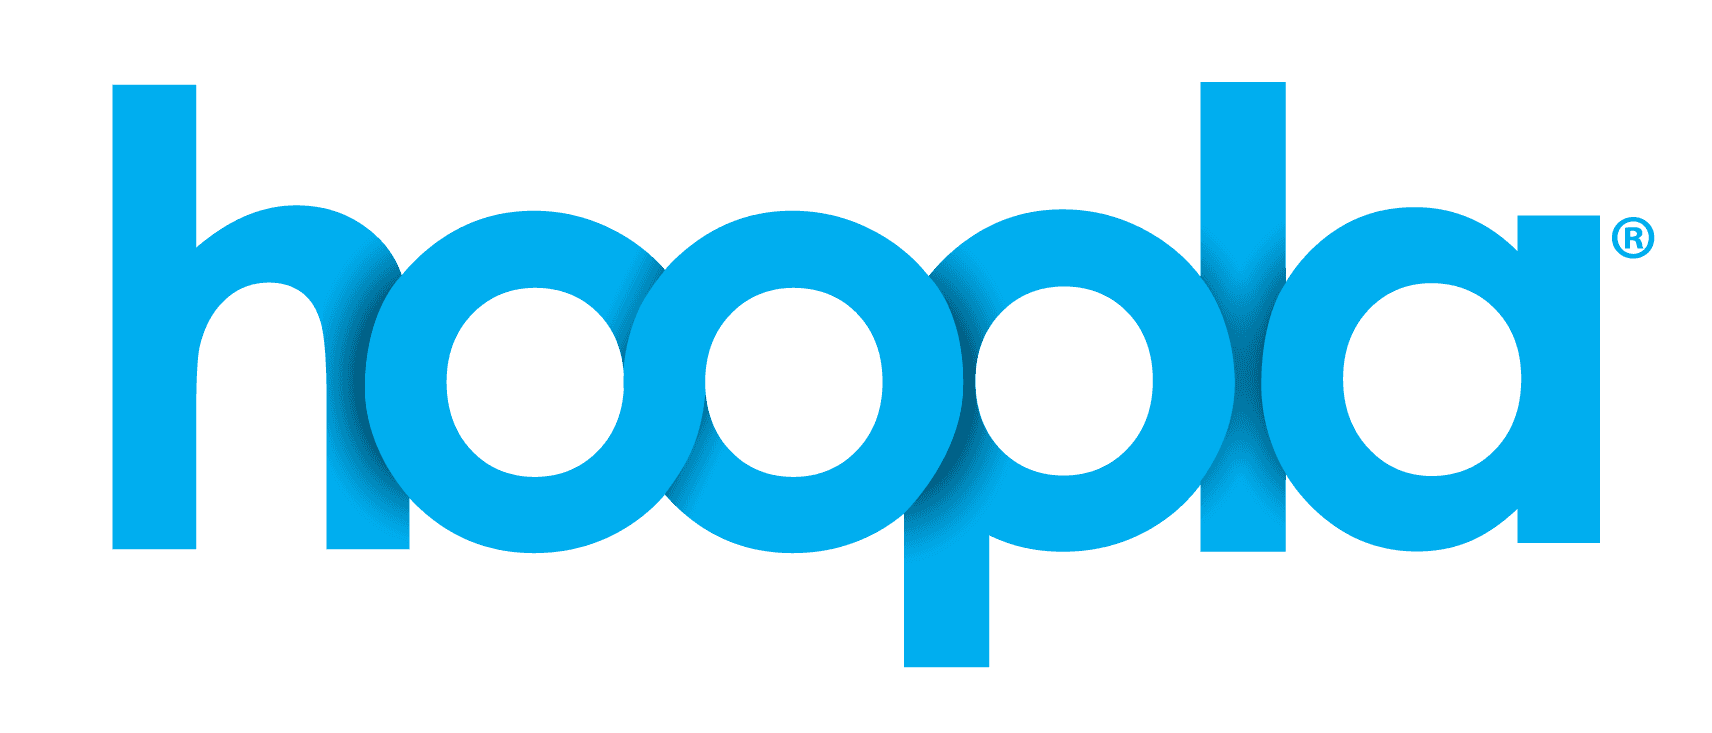 hoopla - Stream or download movies, music, audiobooks